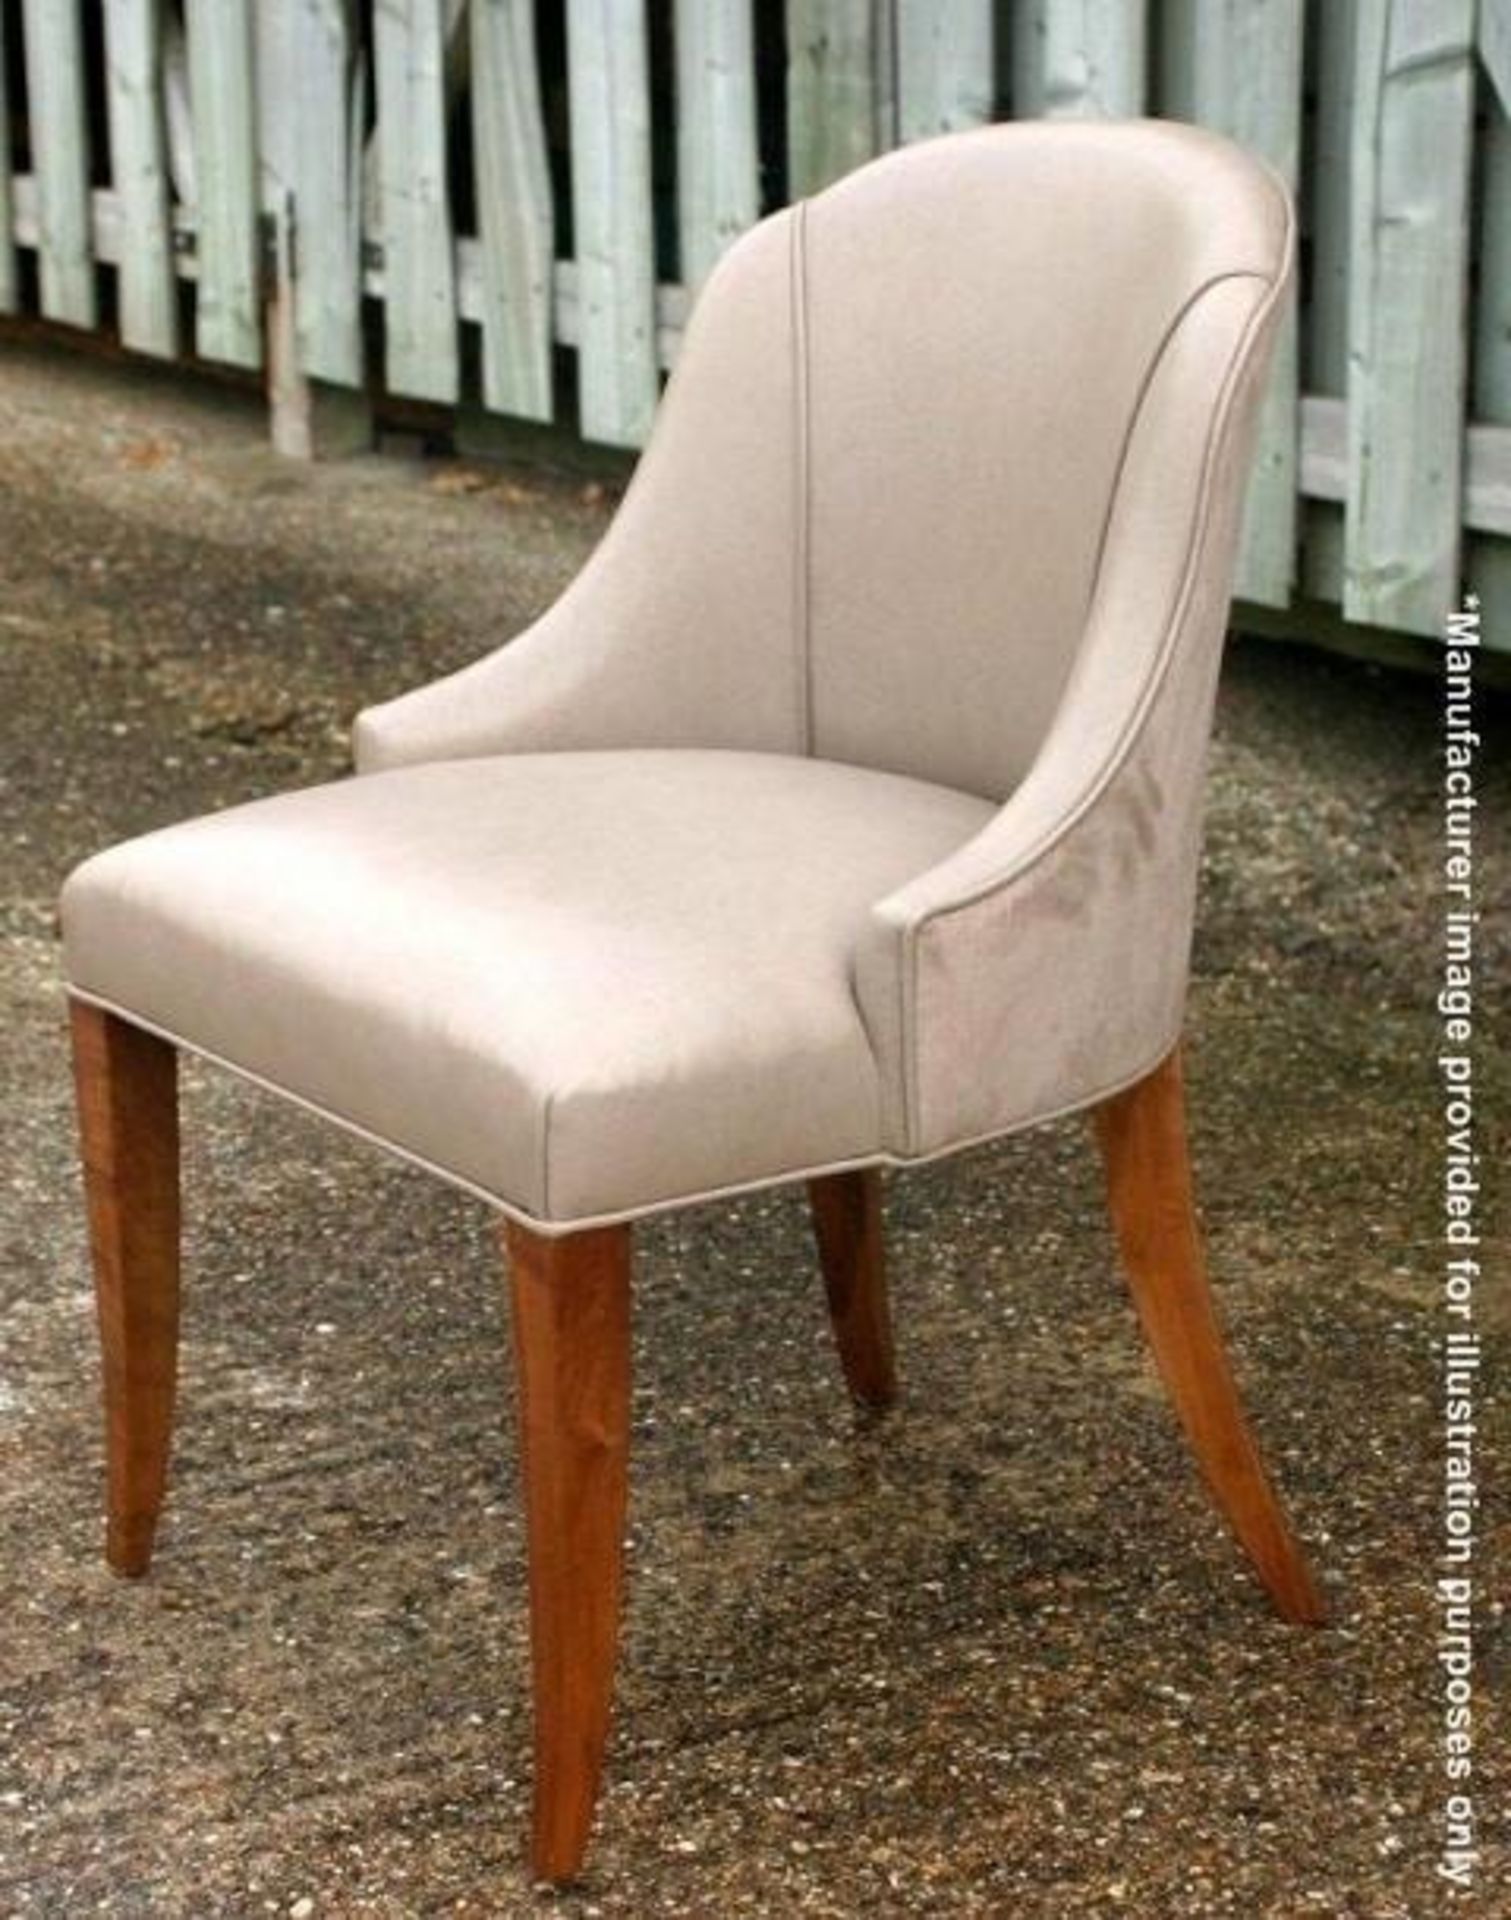 1 x REED &amp; RACKSTRAW "Cloud" Velvet Upholstered Handcrafted Chair - Dimensions: H87 x W58 x D5 - Image 2 of 14